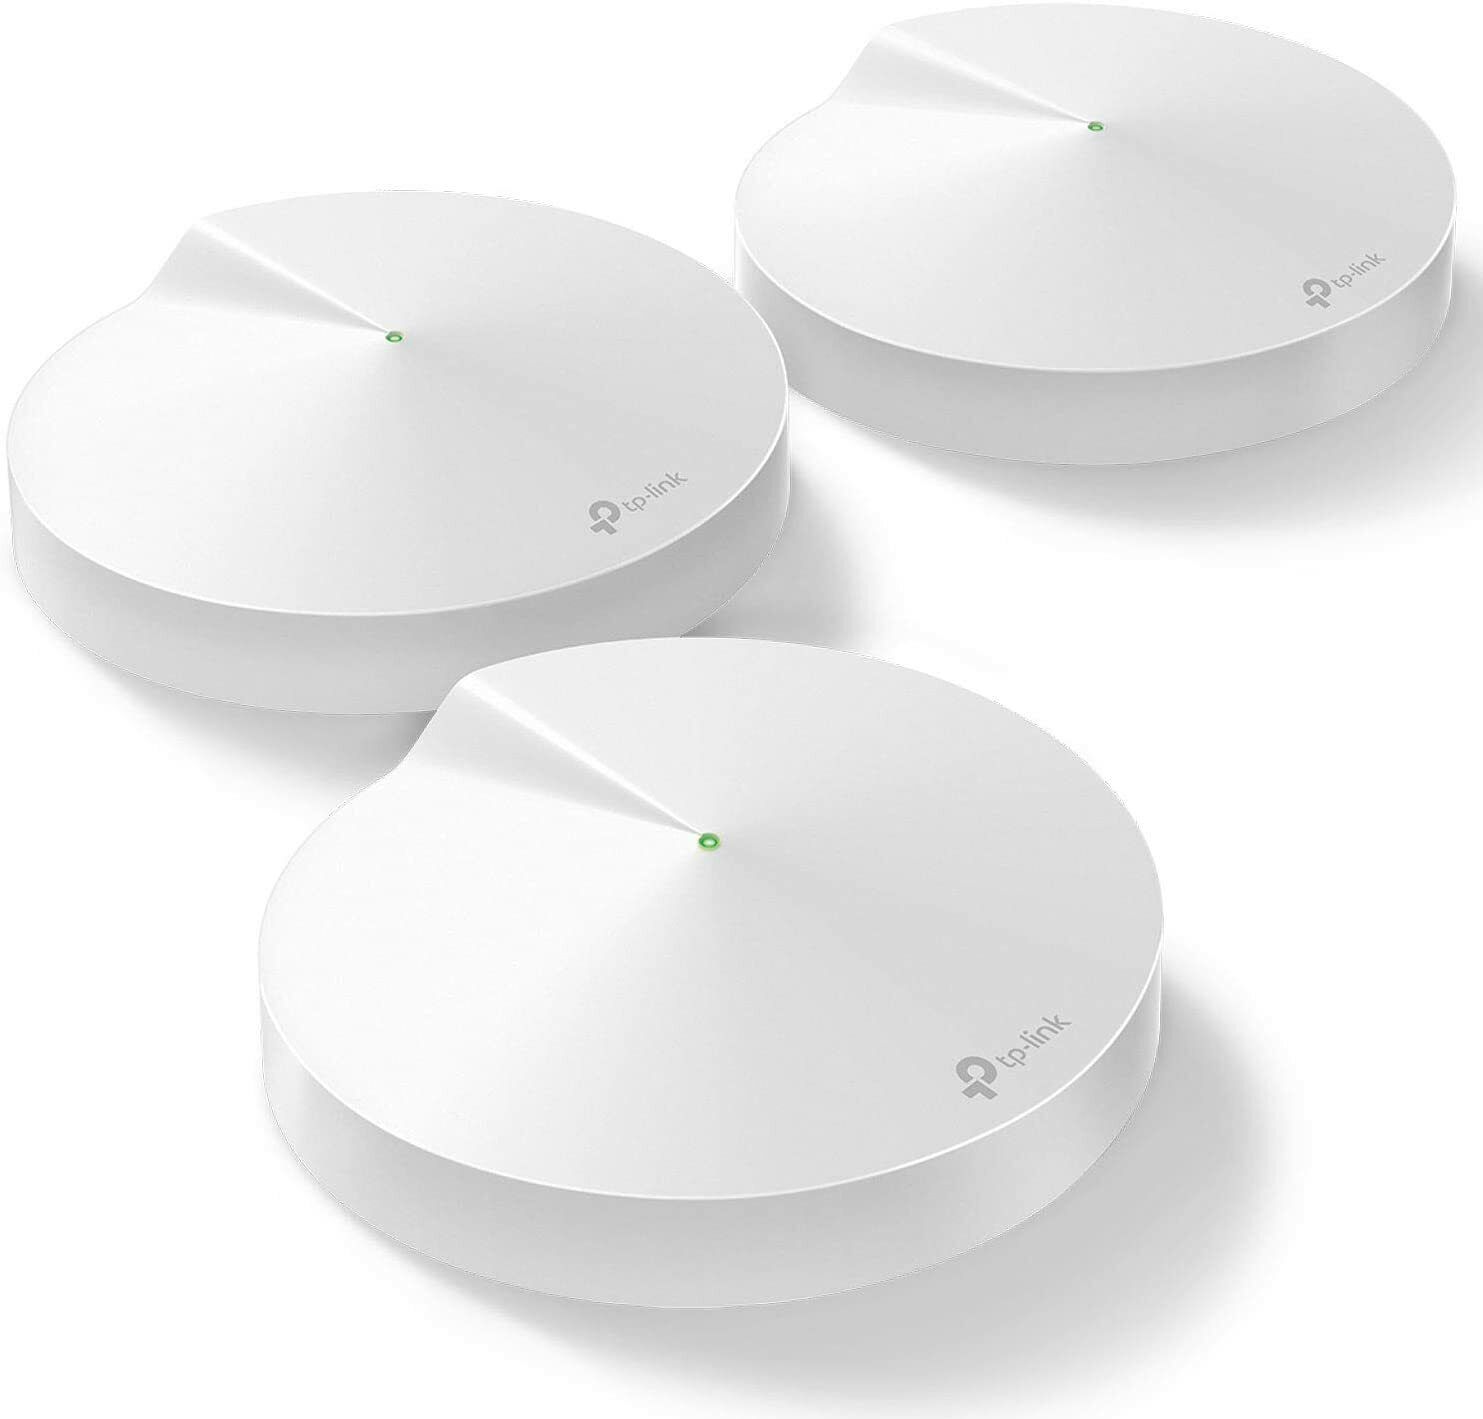 TP-Link Deco Mesh WiFi System(Deco M5) –Up to 5,500 sq. ft. Whole Home Coverage 